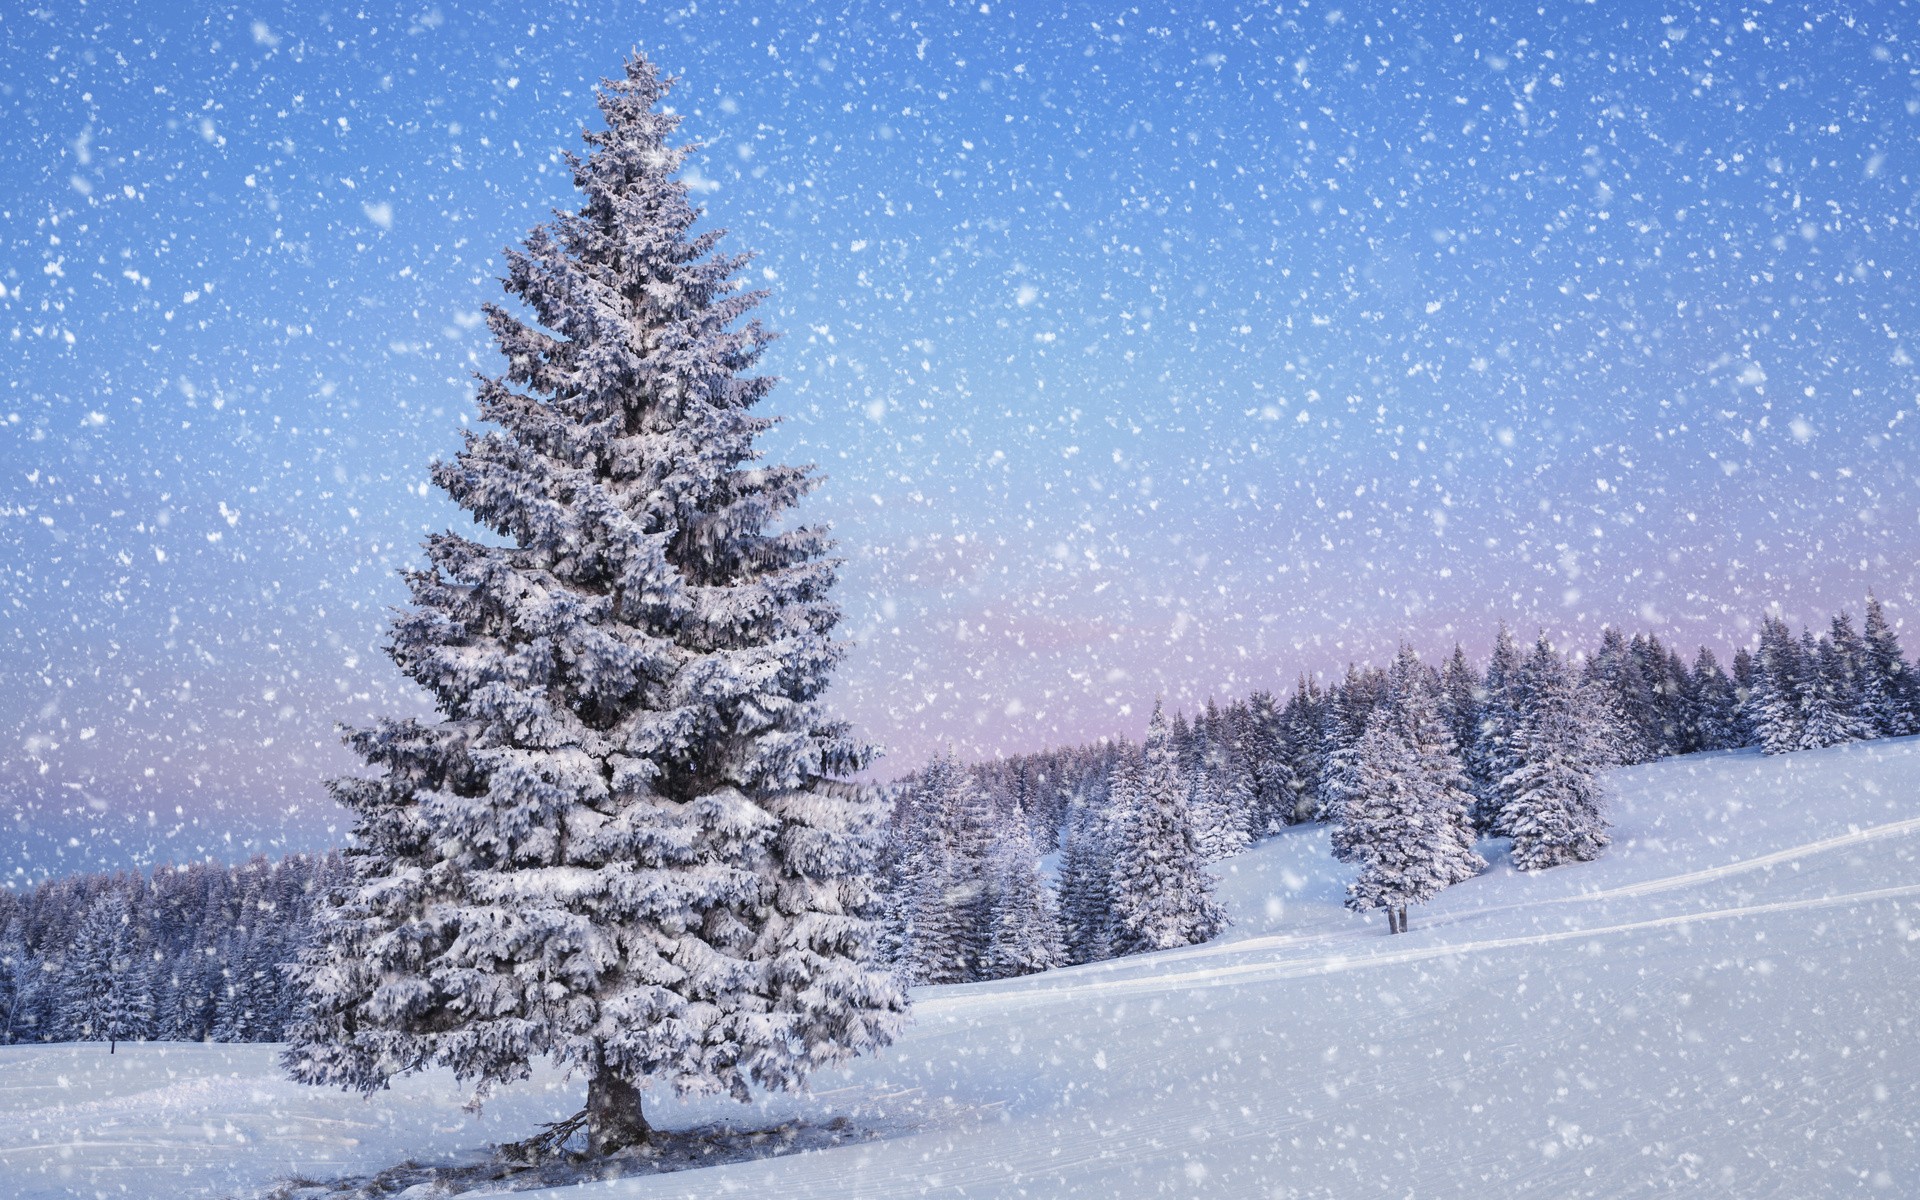 General 1920x1200 winter snow pine trees trees landscape forest outdoors snowflakes plants cold